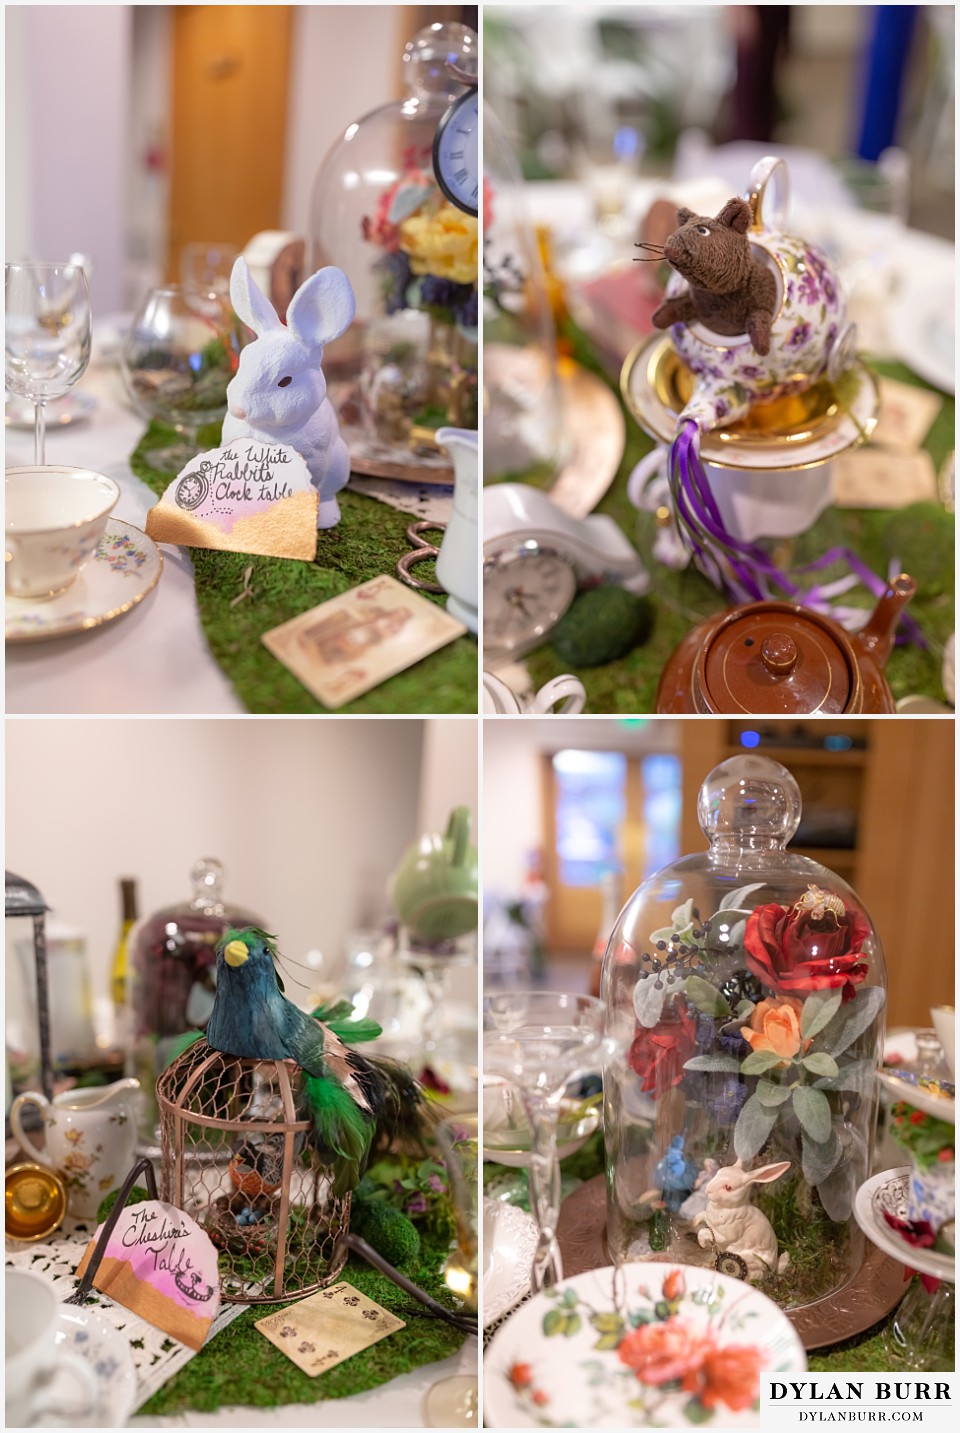 maroon bells wedding aspen colorado mountain wedding alice in wonderland theme white rabbit and mouse in teacup cheshire table